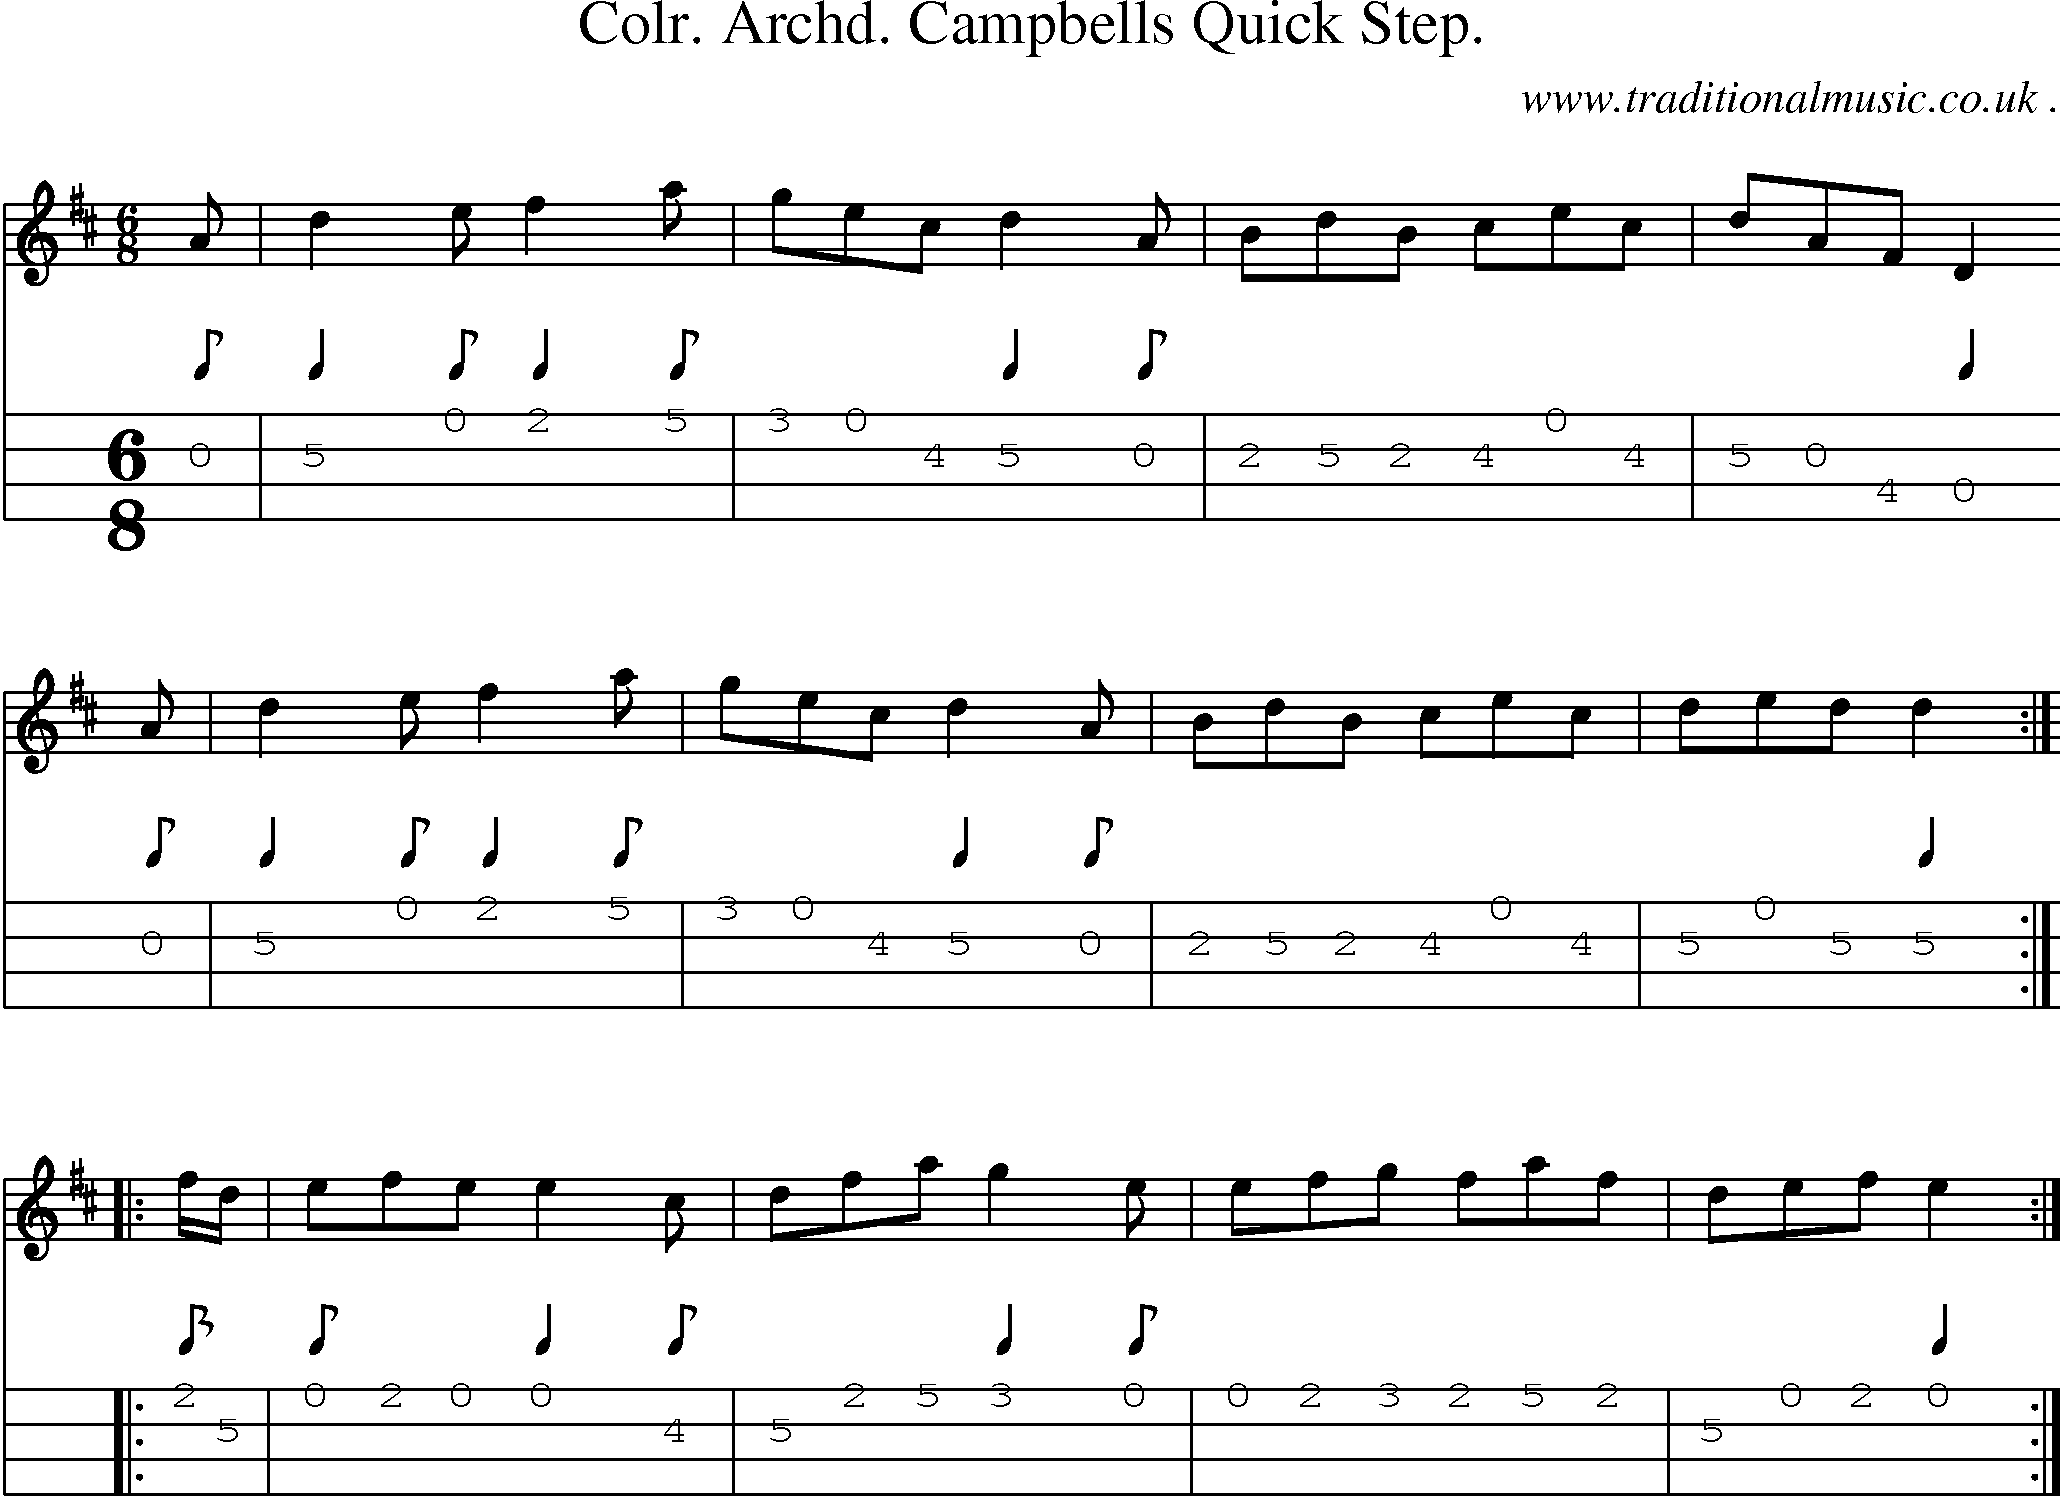 Sheet-Music and Mandolin Tabs for Colr Archd Campbells Quick Step